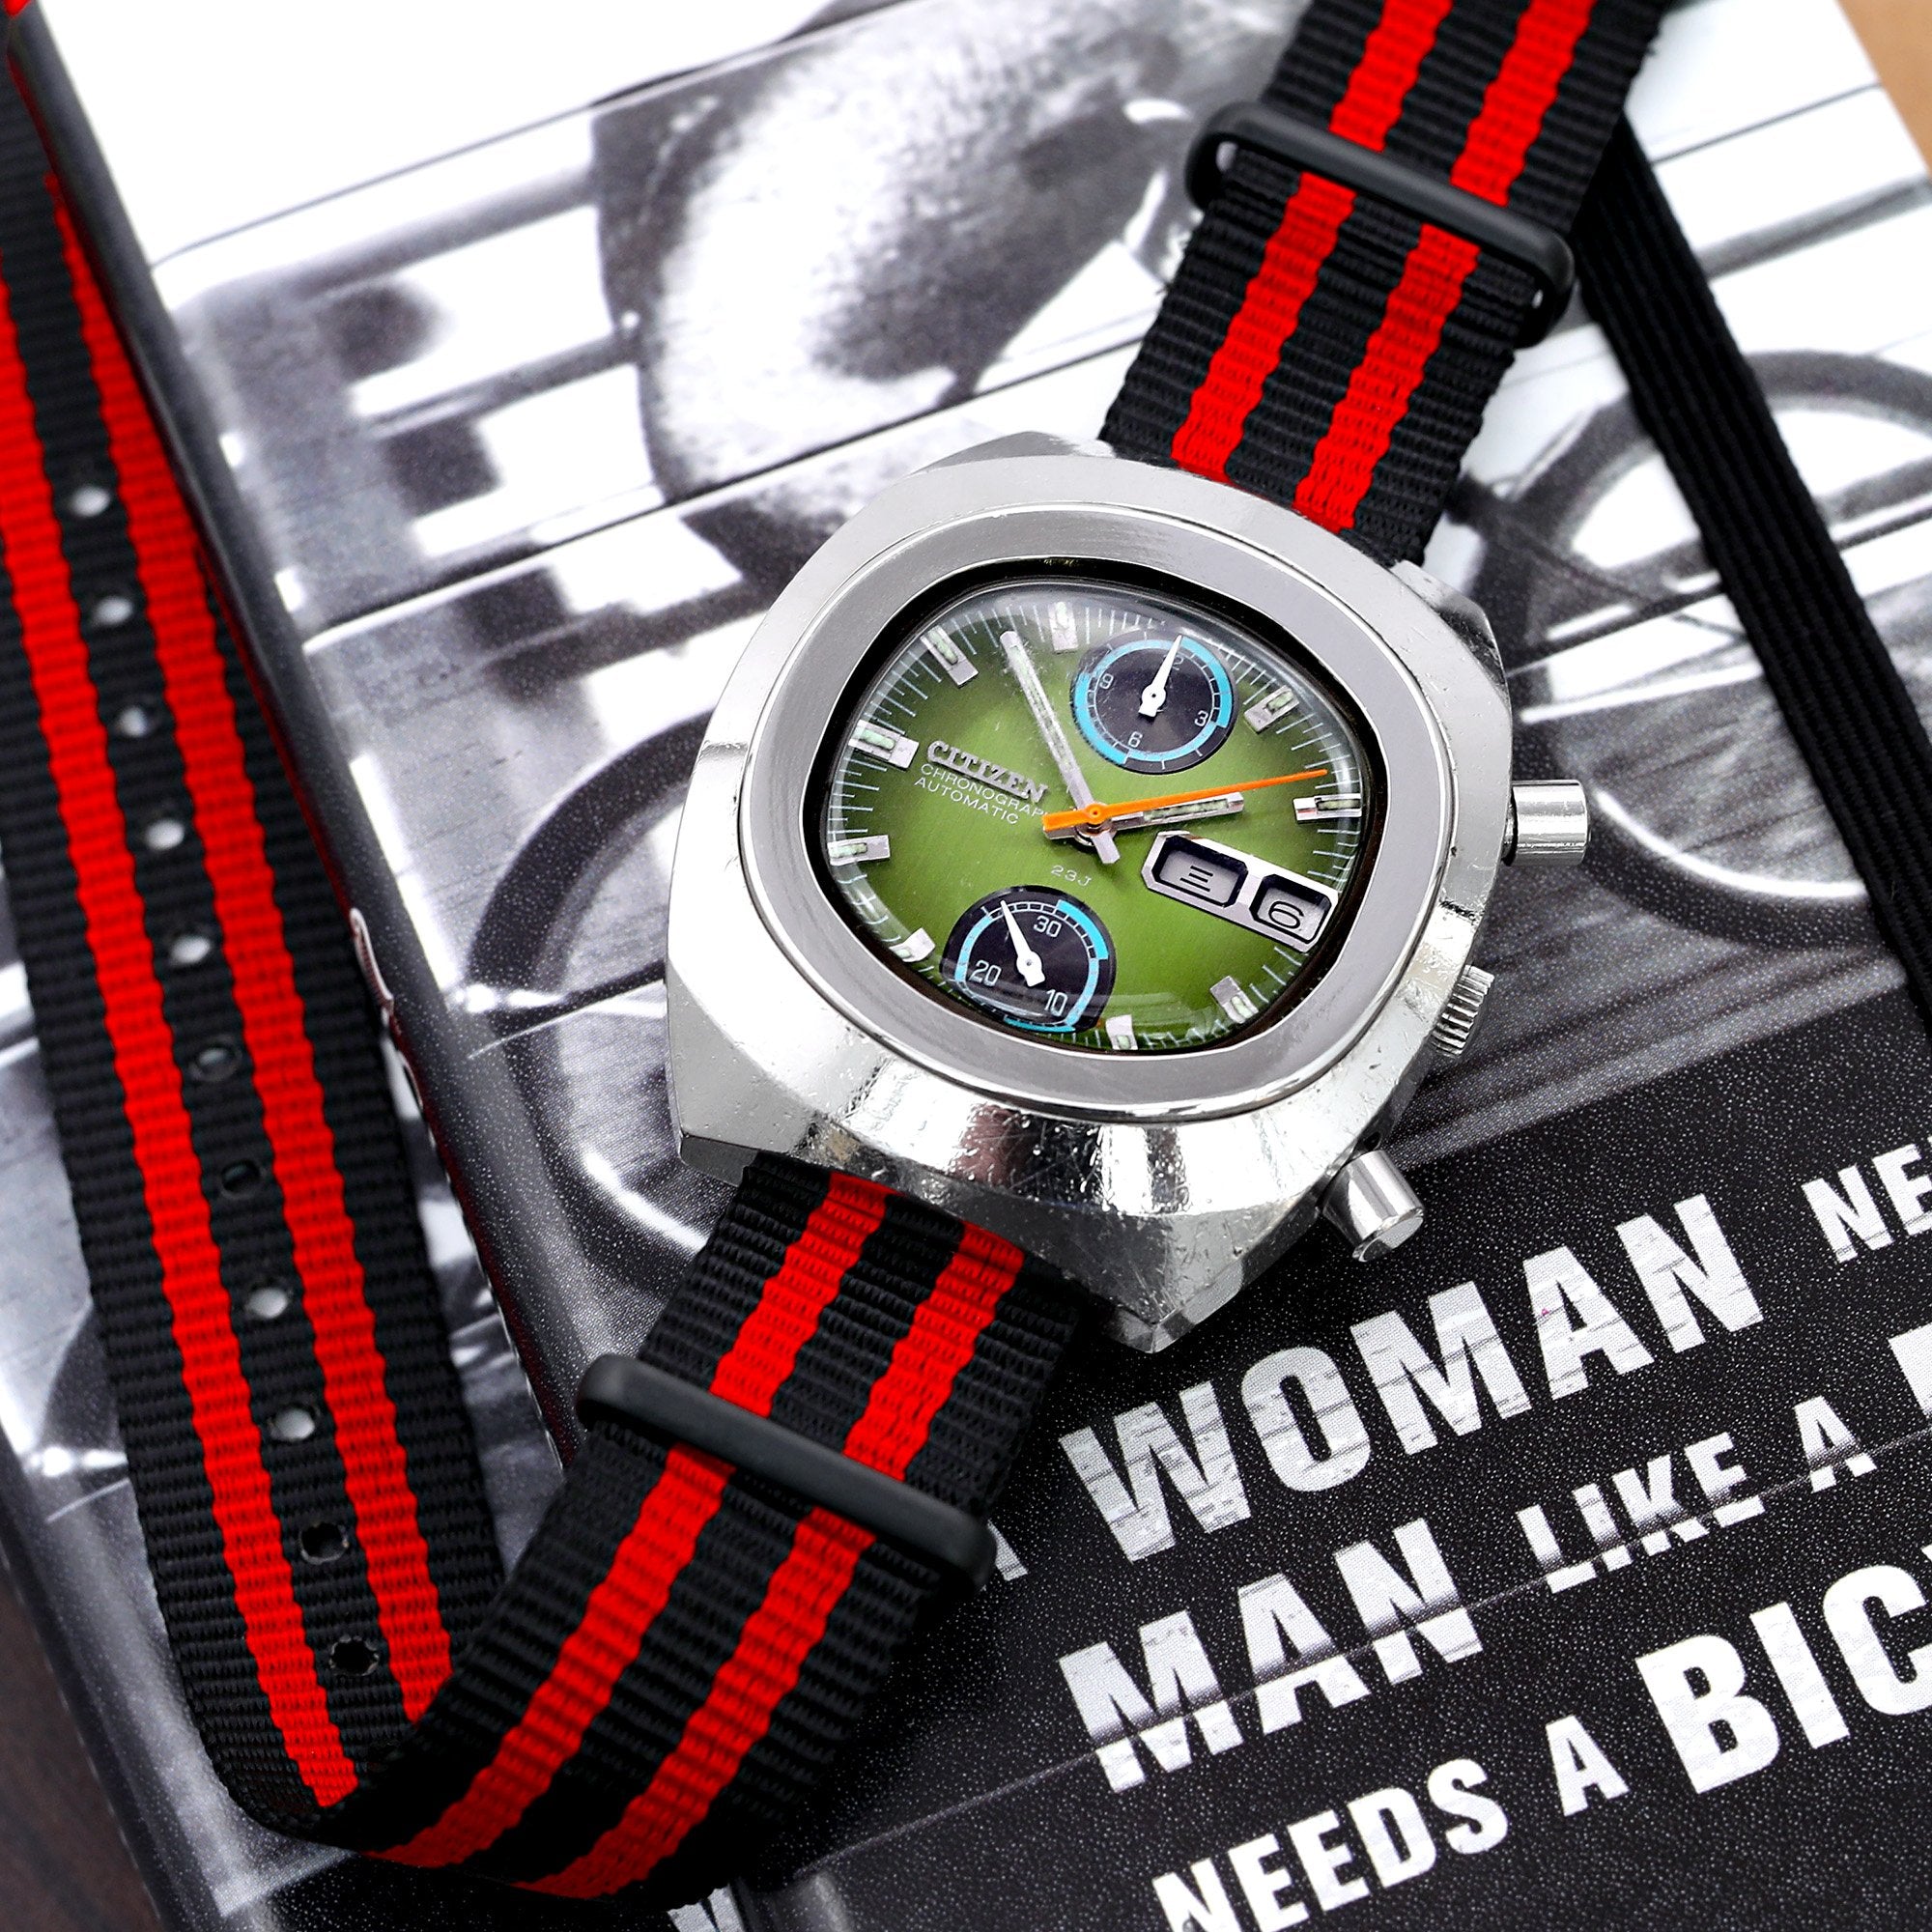 18mm 20mm or 22mm G10 Nato James Bond Heavy Nylon Strap PVD Black Buckle J03 Double Black & Red Strapcode Watch Bands